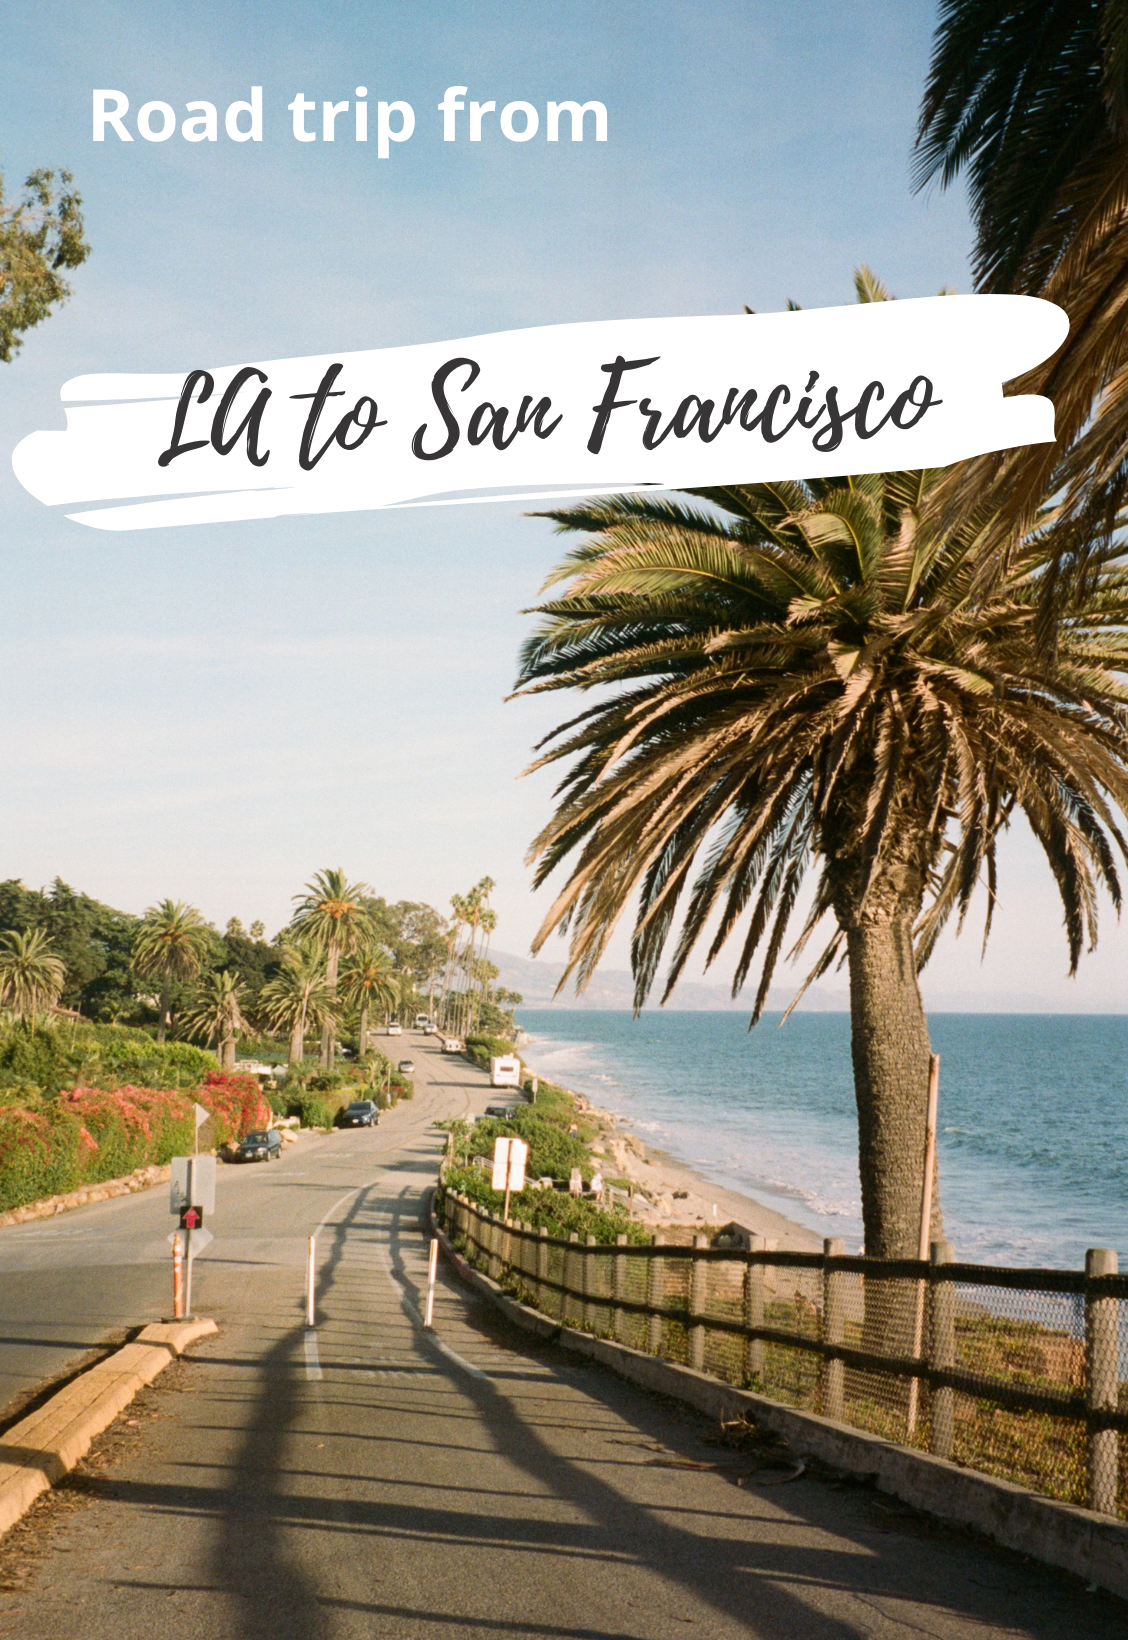 Road trip from LA to San Francisco